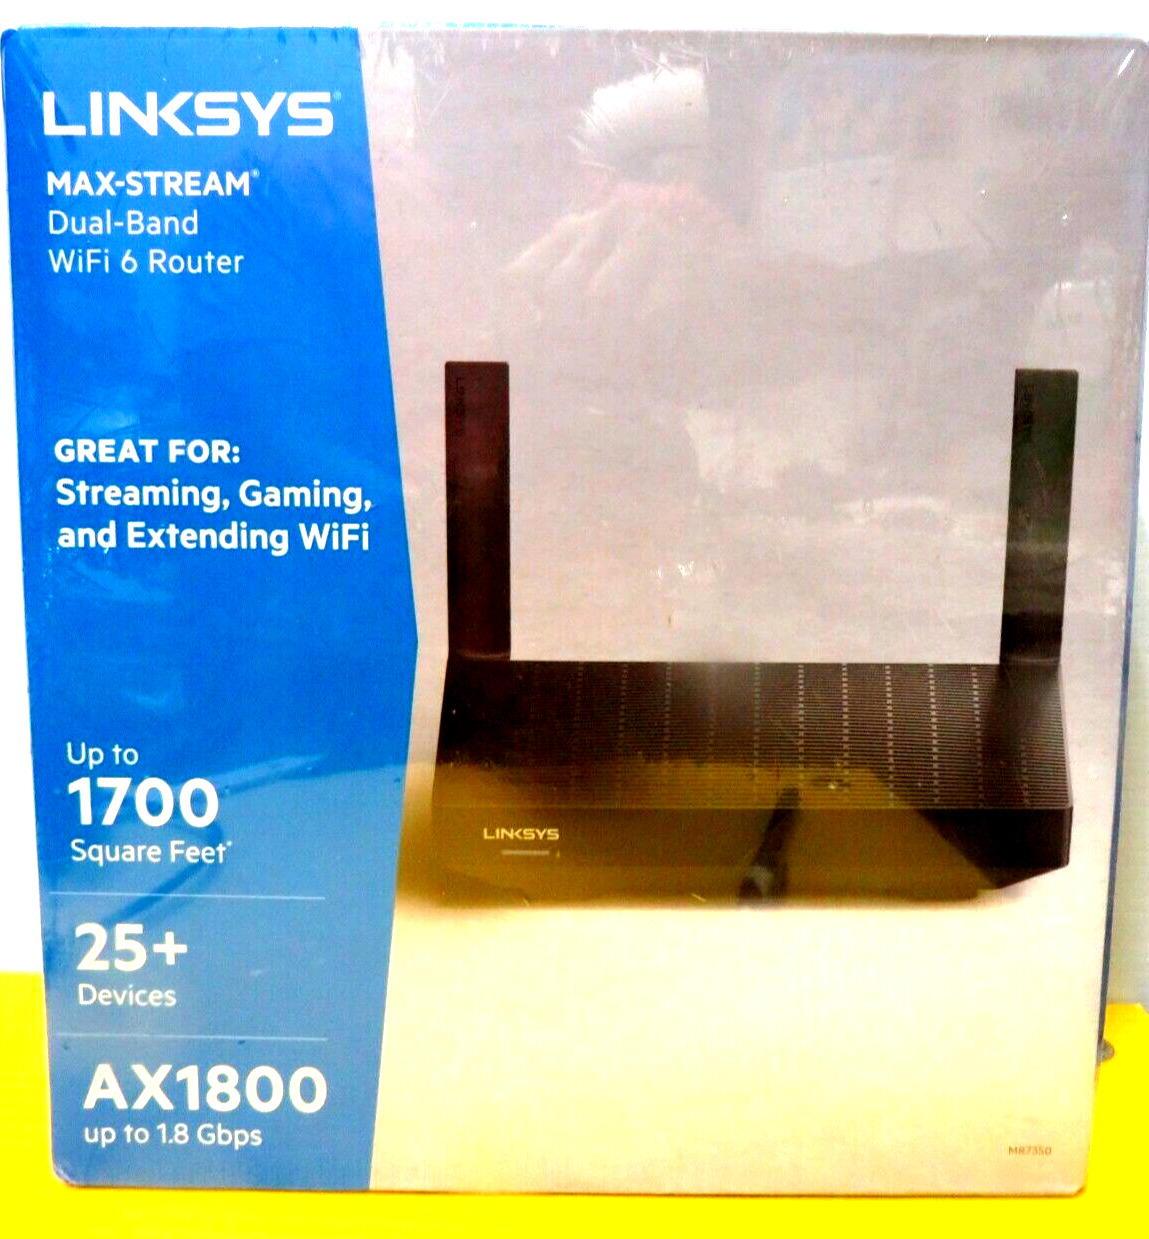 $140 BRAND NEW SEALED - Linksys MR7350 Max-Stream Dual-Band Wi-Fi 6 Router